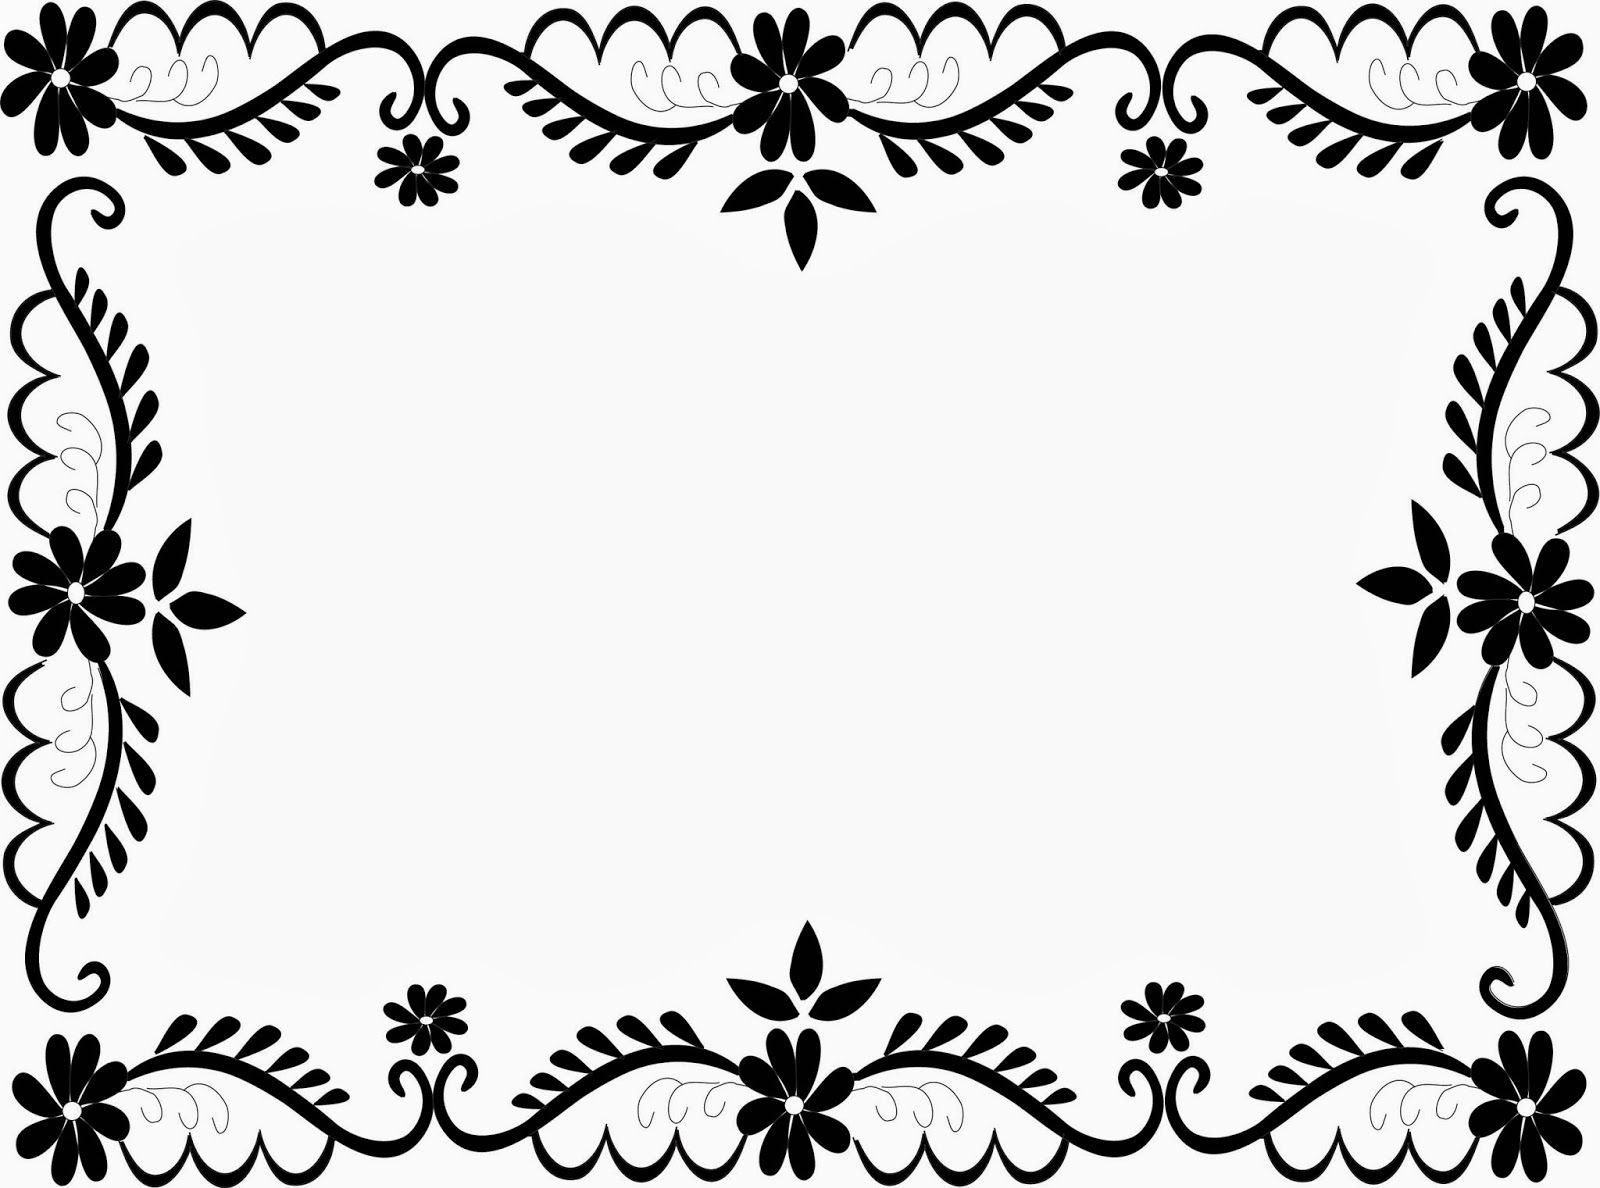 Flower Frame Clipart Black And White Free download on